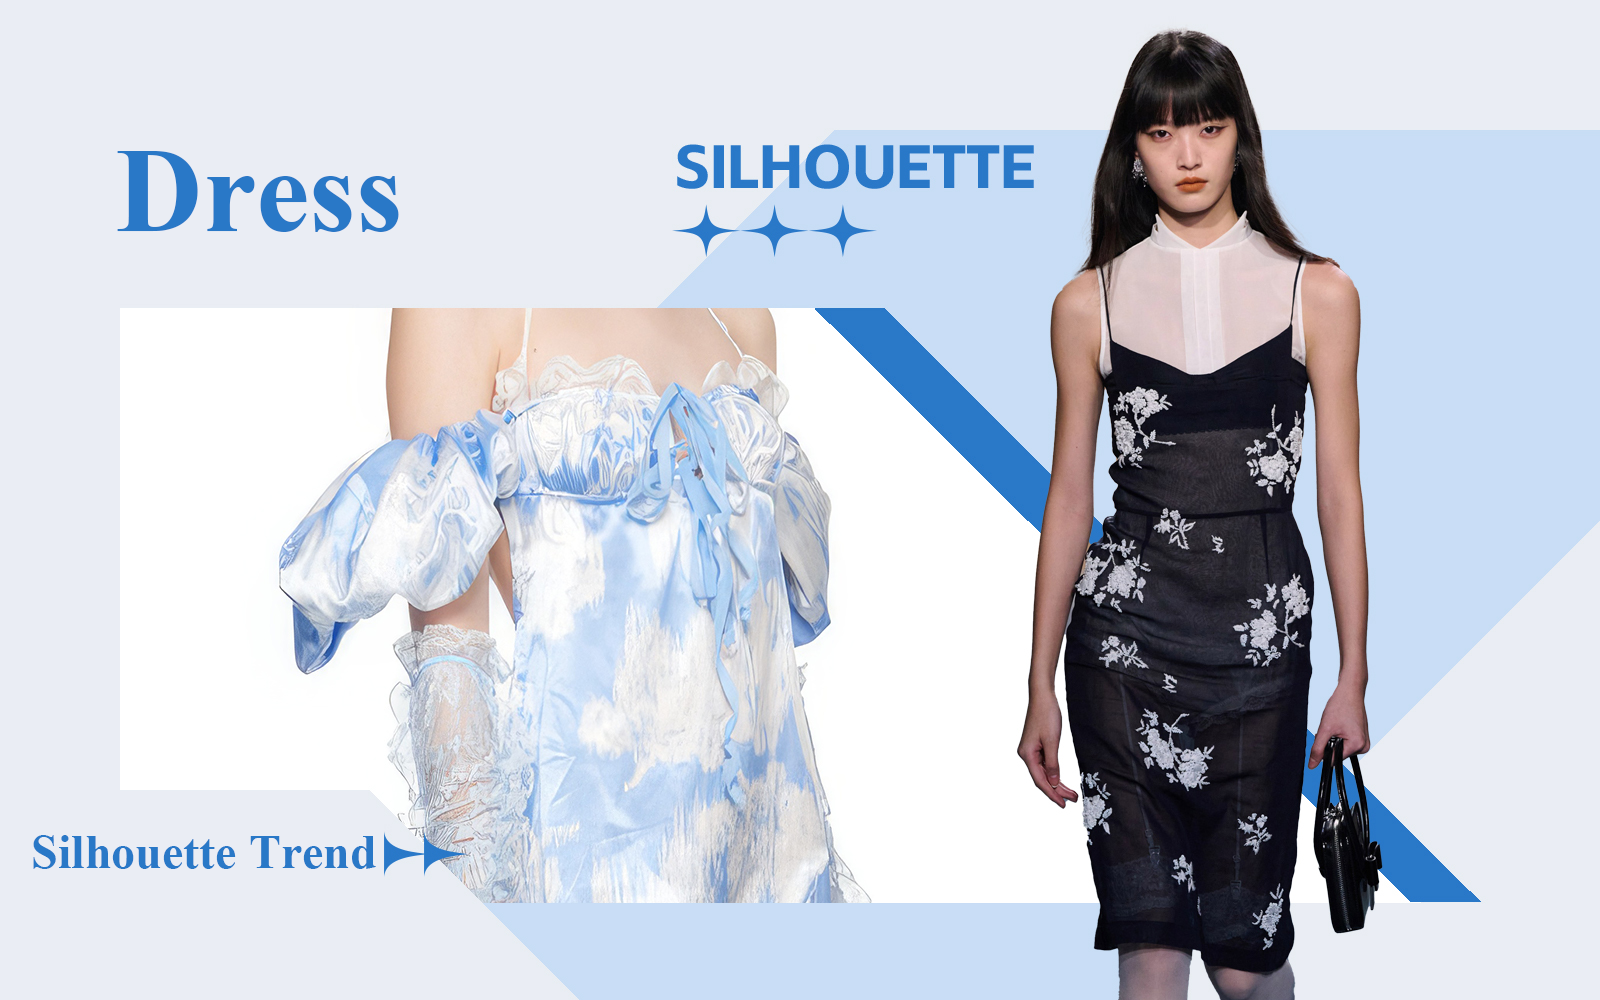 The Silhouette Trend for Women's Dress